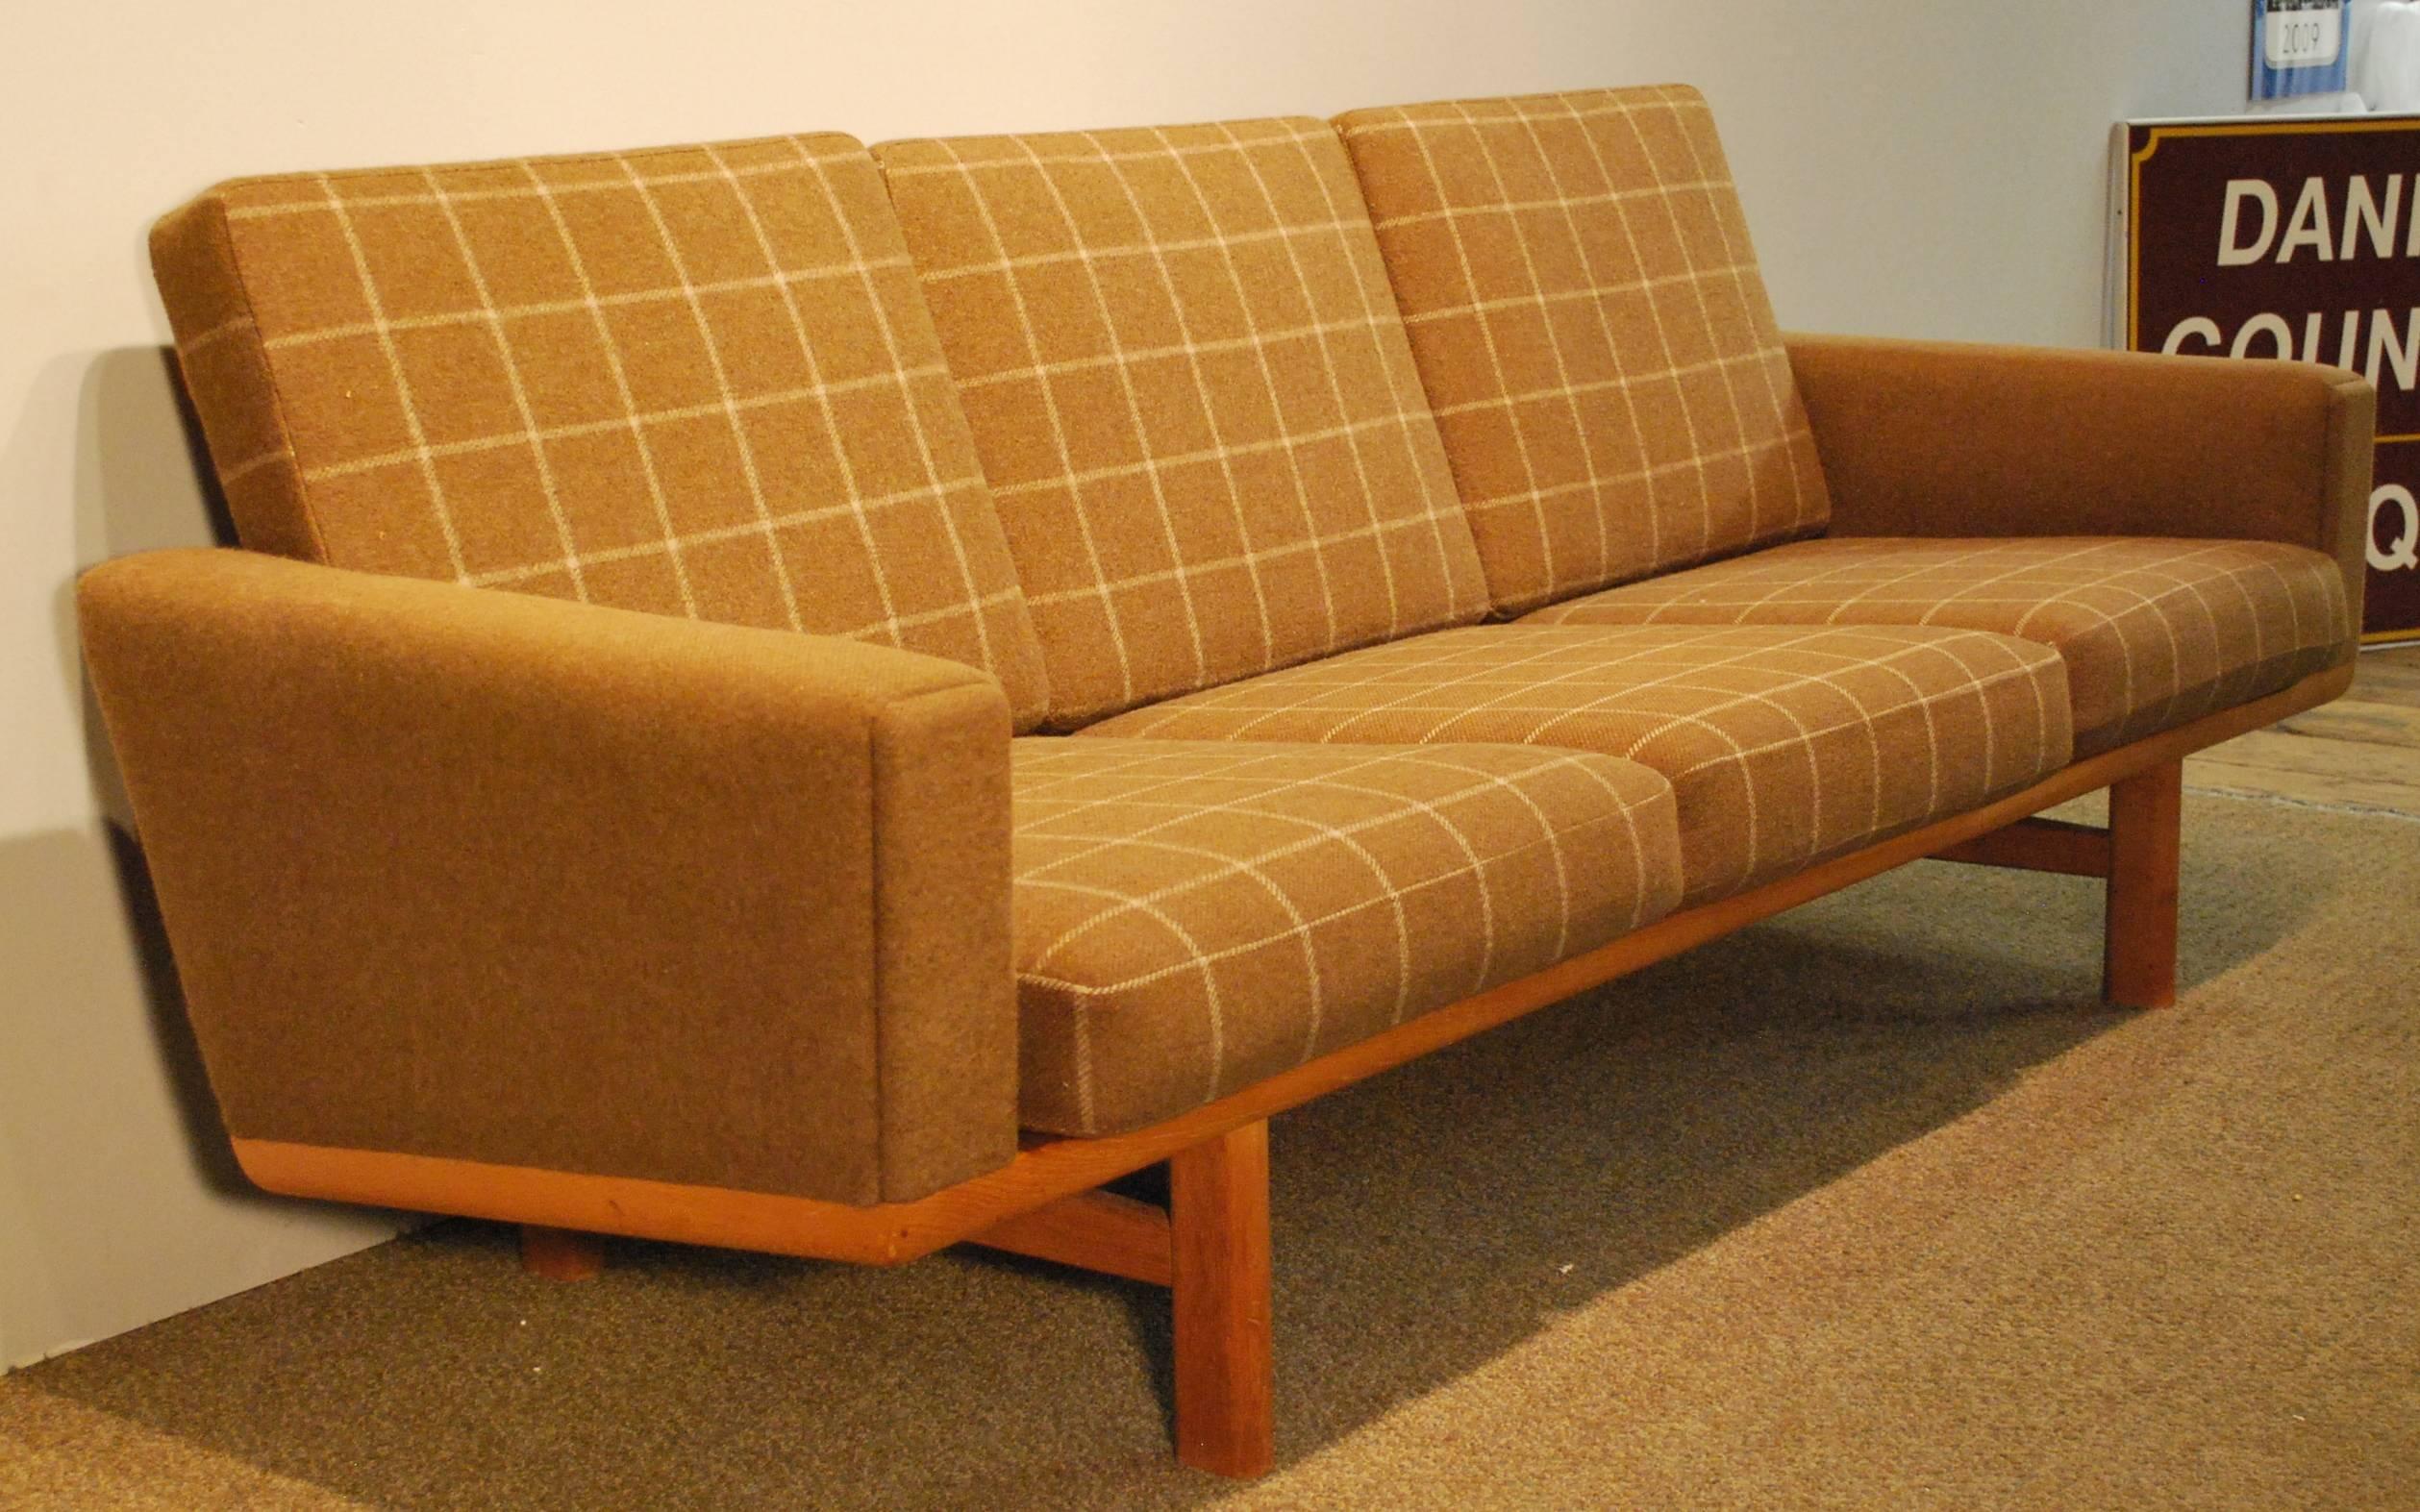 A Hans Wegner designed Mid-Century Modern sofa, Model 236, manufactured by GETAMA Mobelfabrik, and displaying a Classic wool blend fabric upholstered three cushion design in a simple beech wood slat back frame.